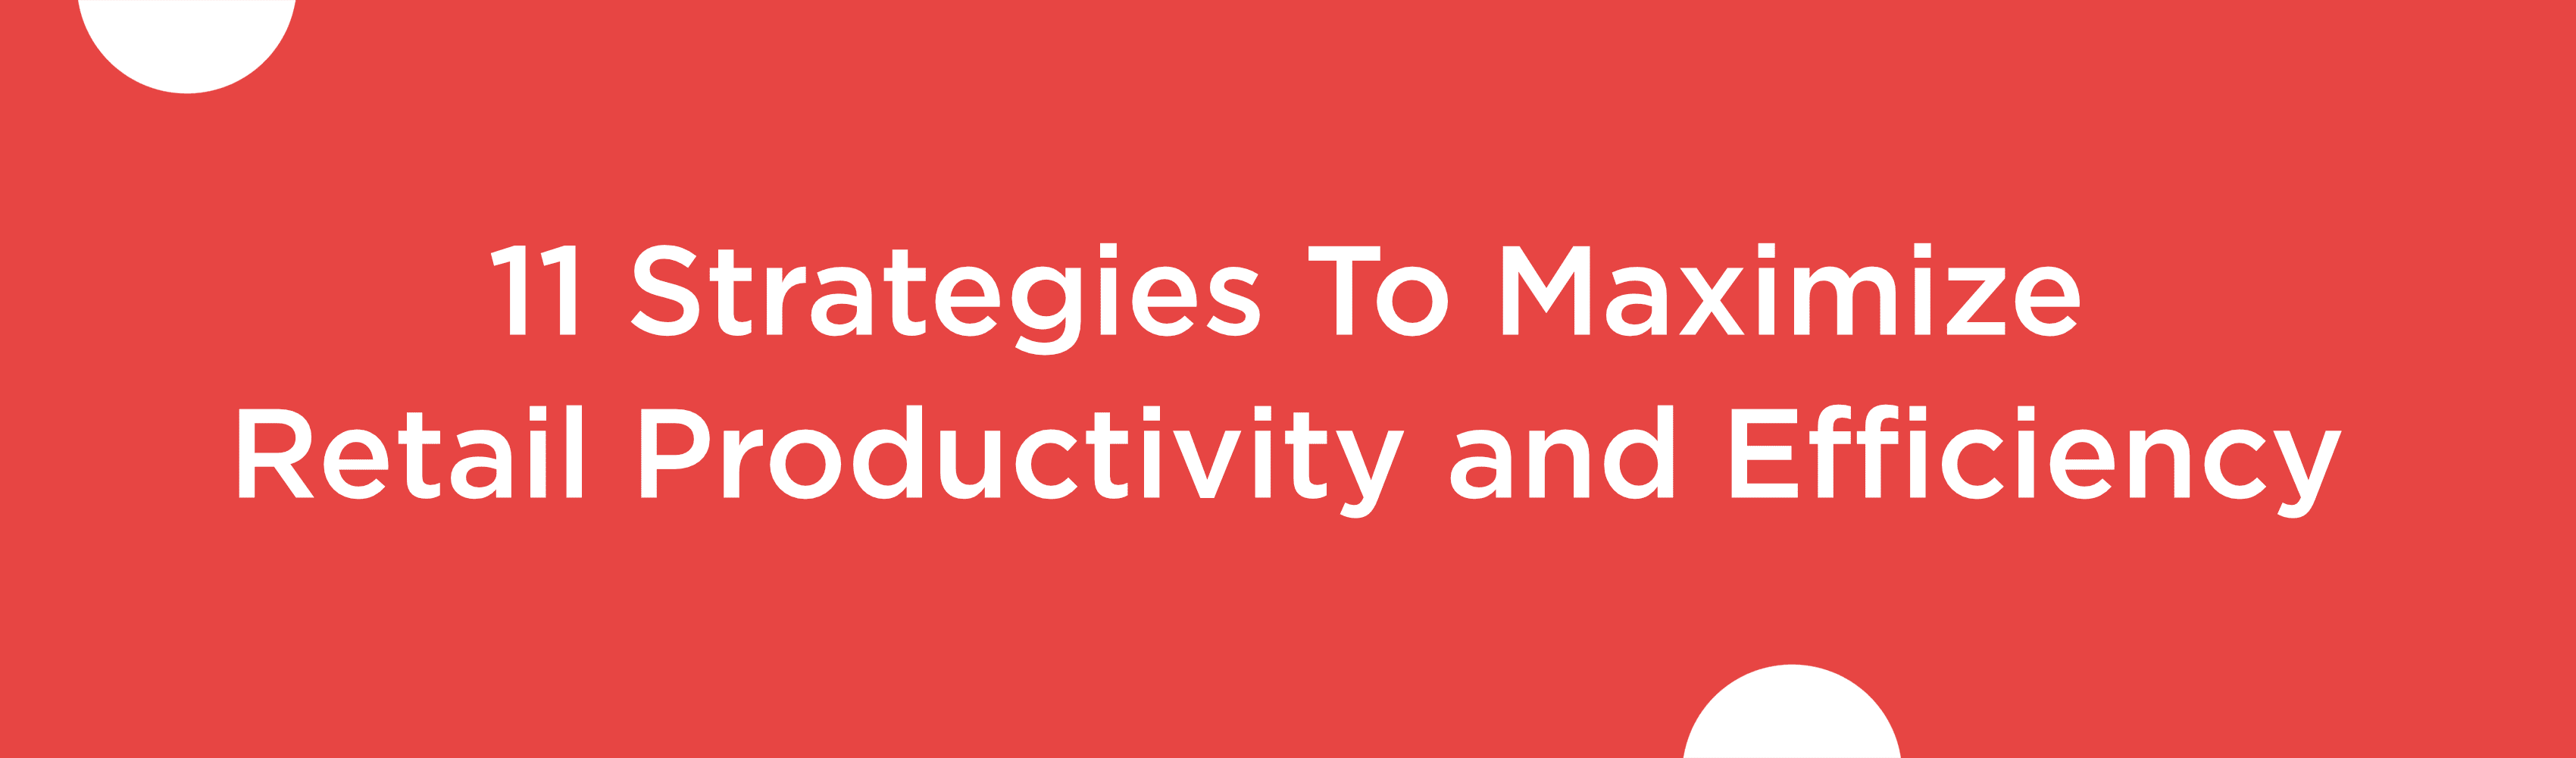 11 Strategies To Maximize Retail Productivity and Efficiency